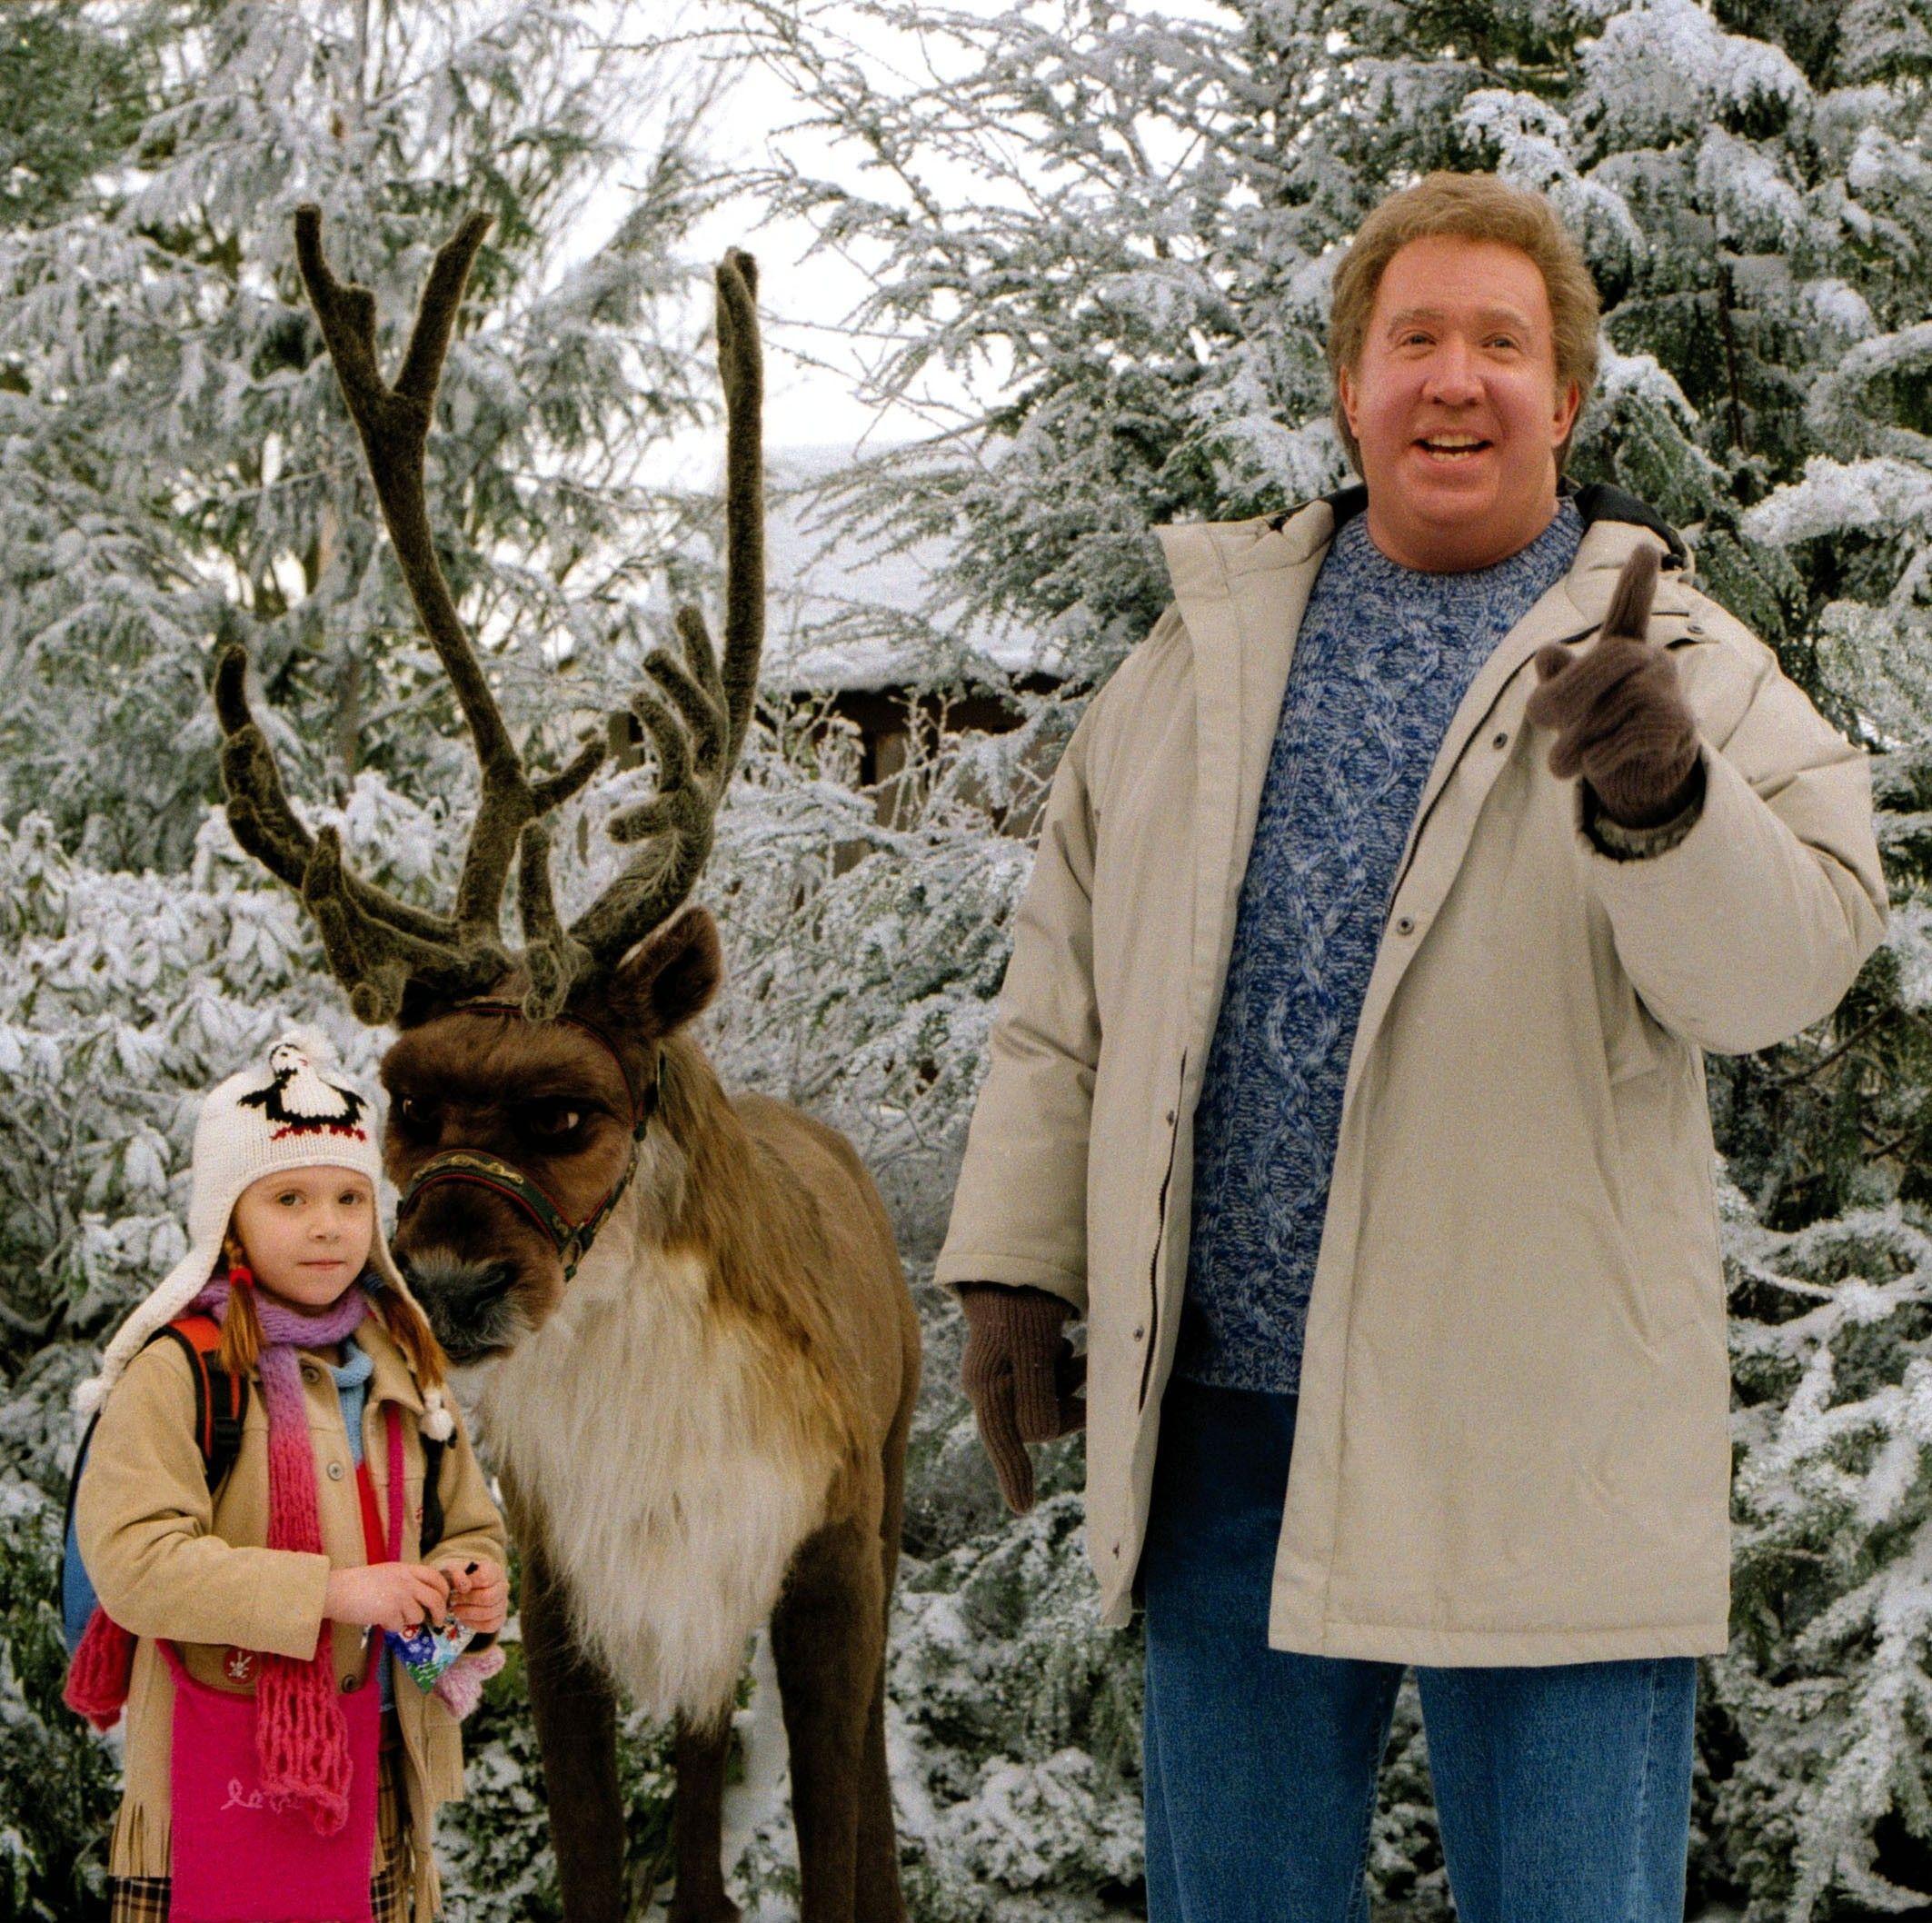 Tim Allen image The Santa Clause 2 HD wallpaper and background